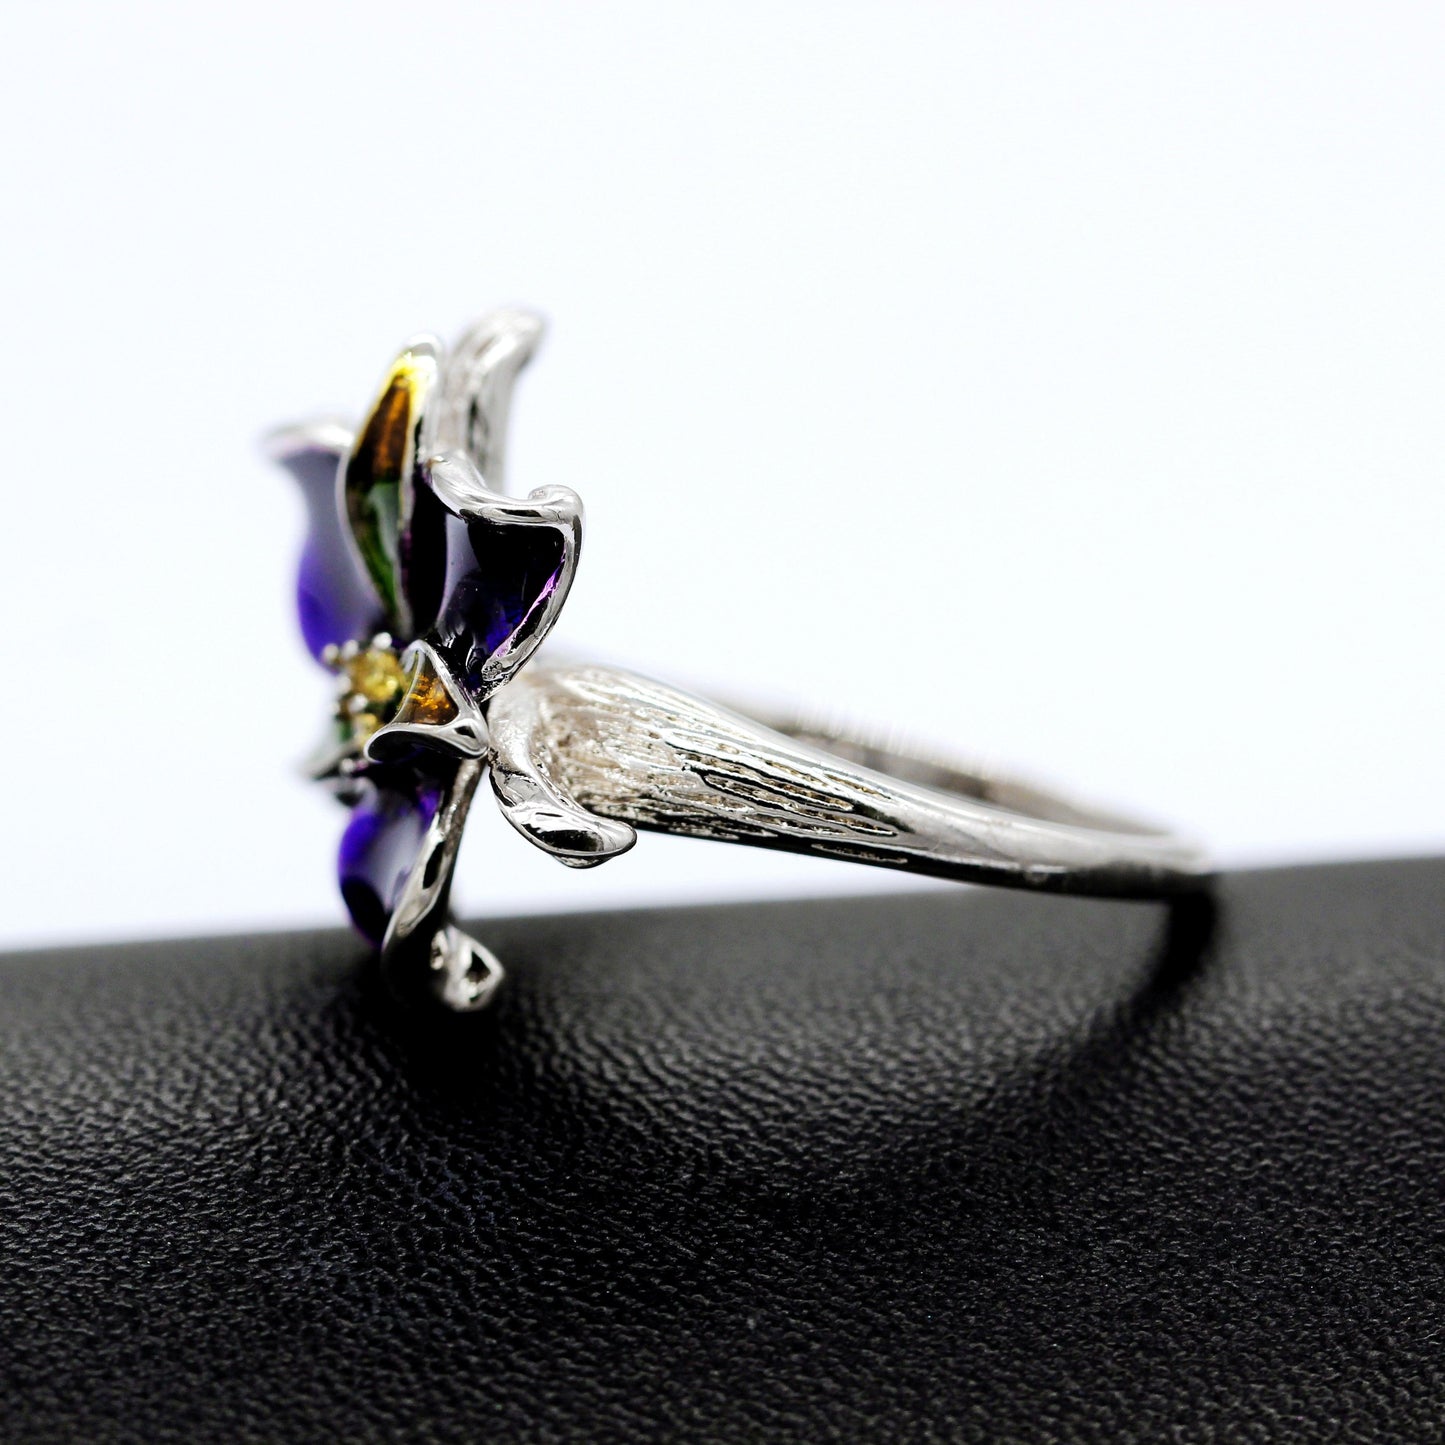 Women's Silver Color Beautiful Purple Enamel Violet Flower Ring - Wedding Party Cocktail Ring Jewelry (D81)(7JW)